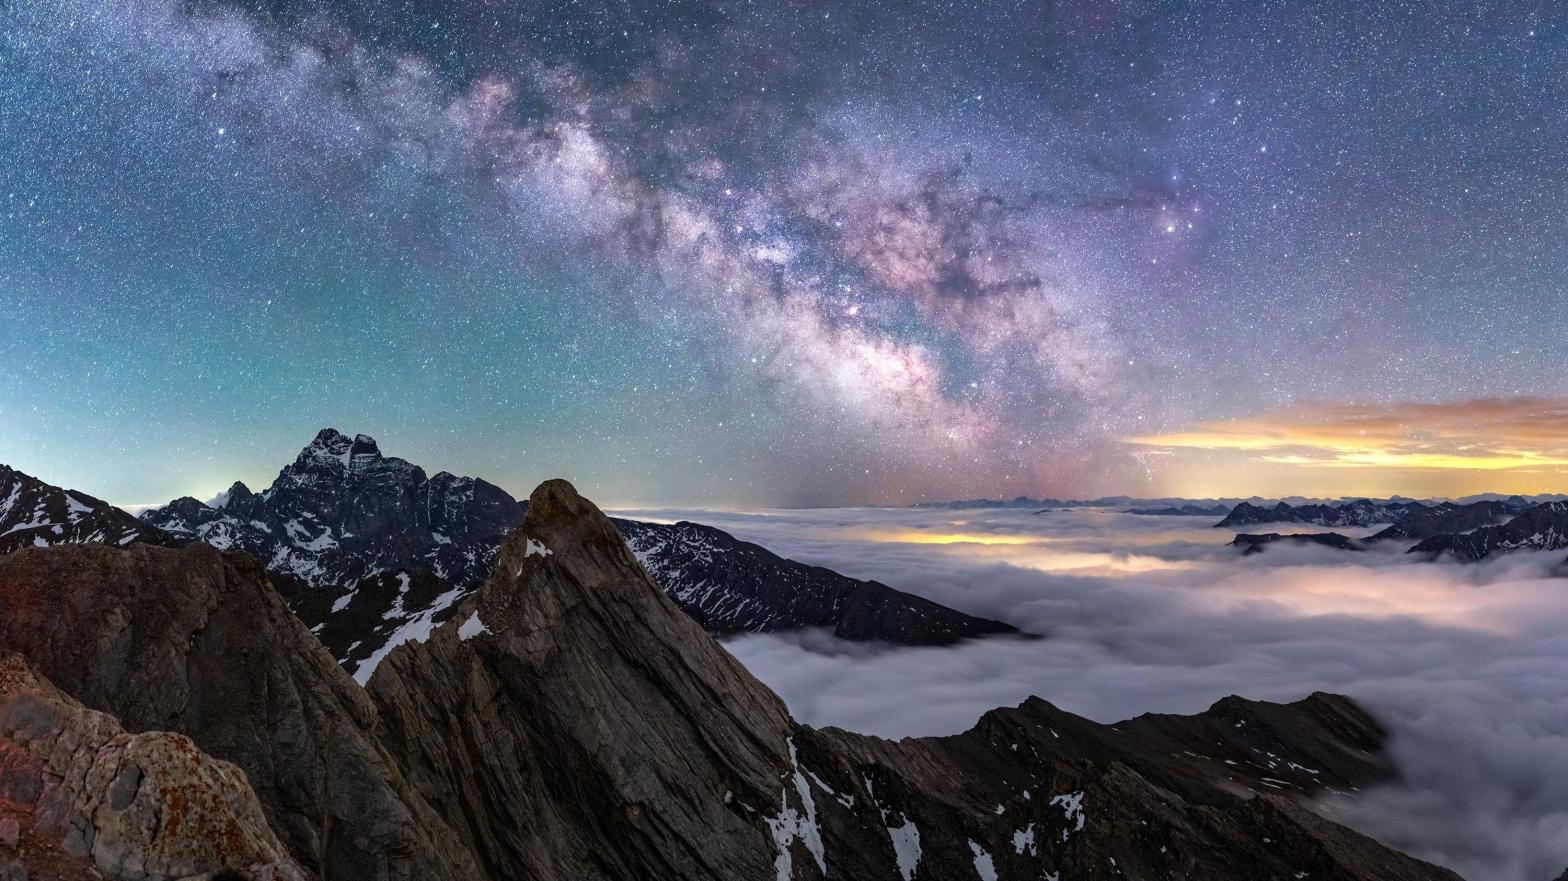 The Milky Way over Pain de Sucre, France. (Photo: Jeff Graphy)